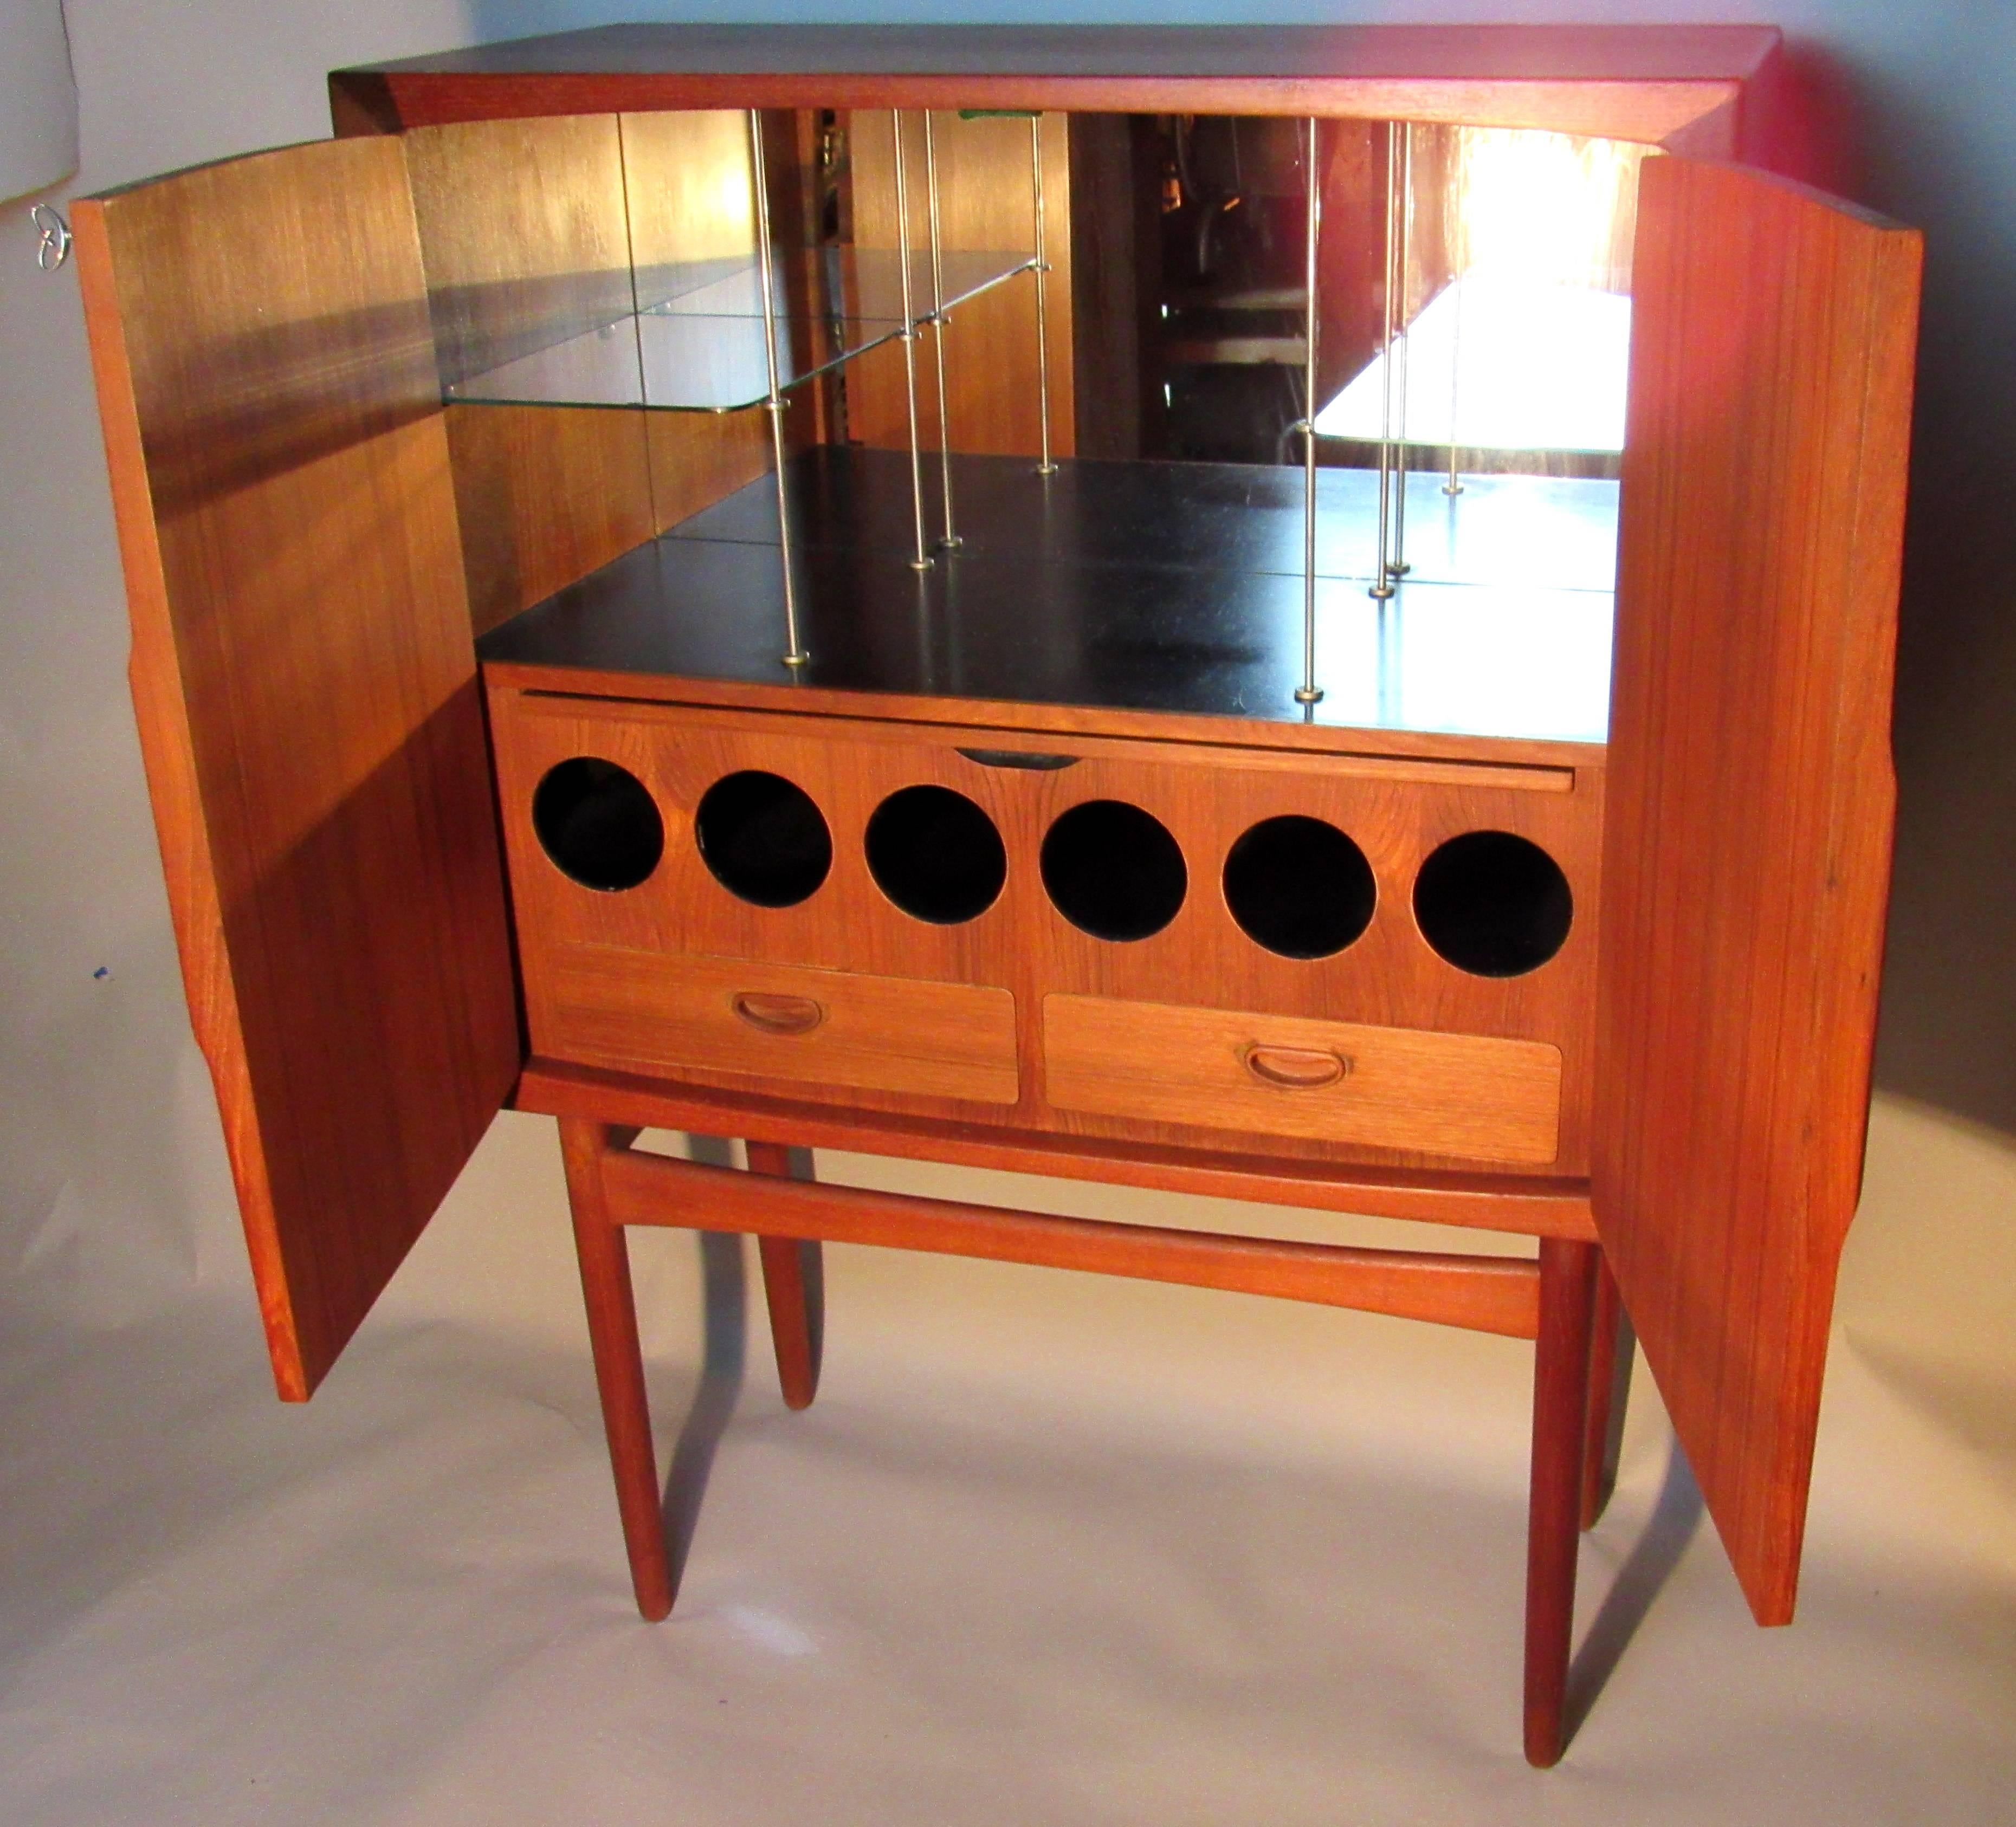 A teak dry bar by Torbjorn Afdal for Mellemstrands Møbelfabrik, Norway model Bacchus from the early 1950s.
The glass shelves have minor chips otherwise the bar is in excellent condition.
                 